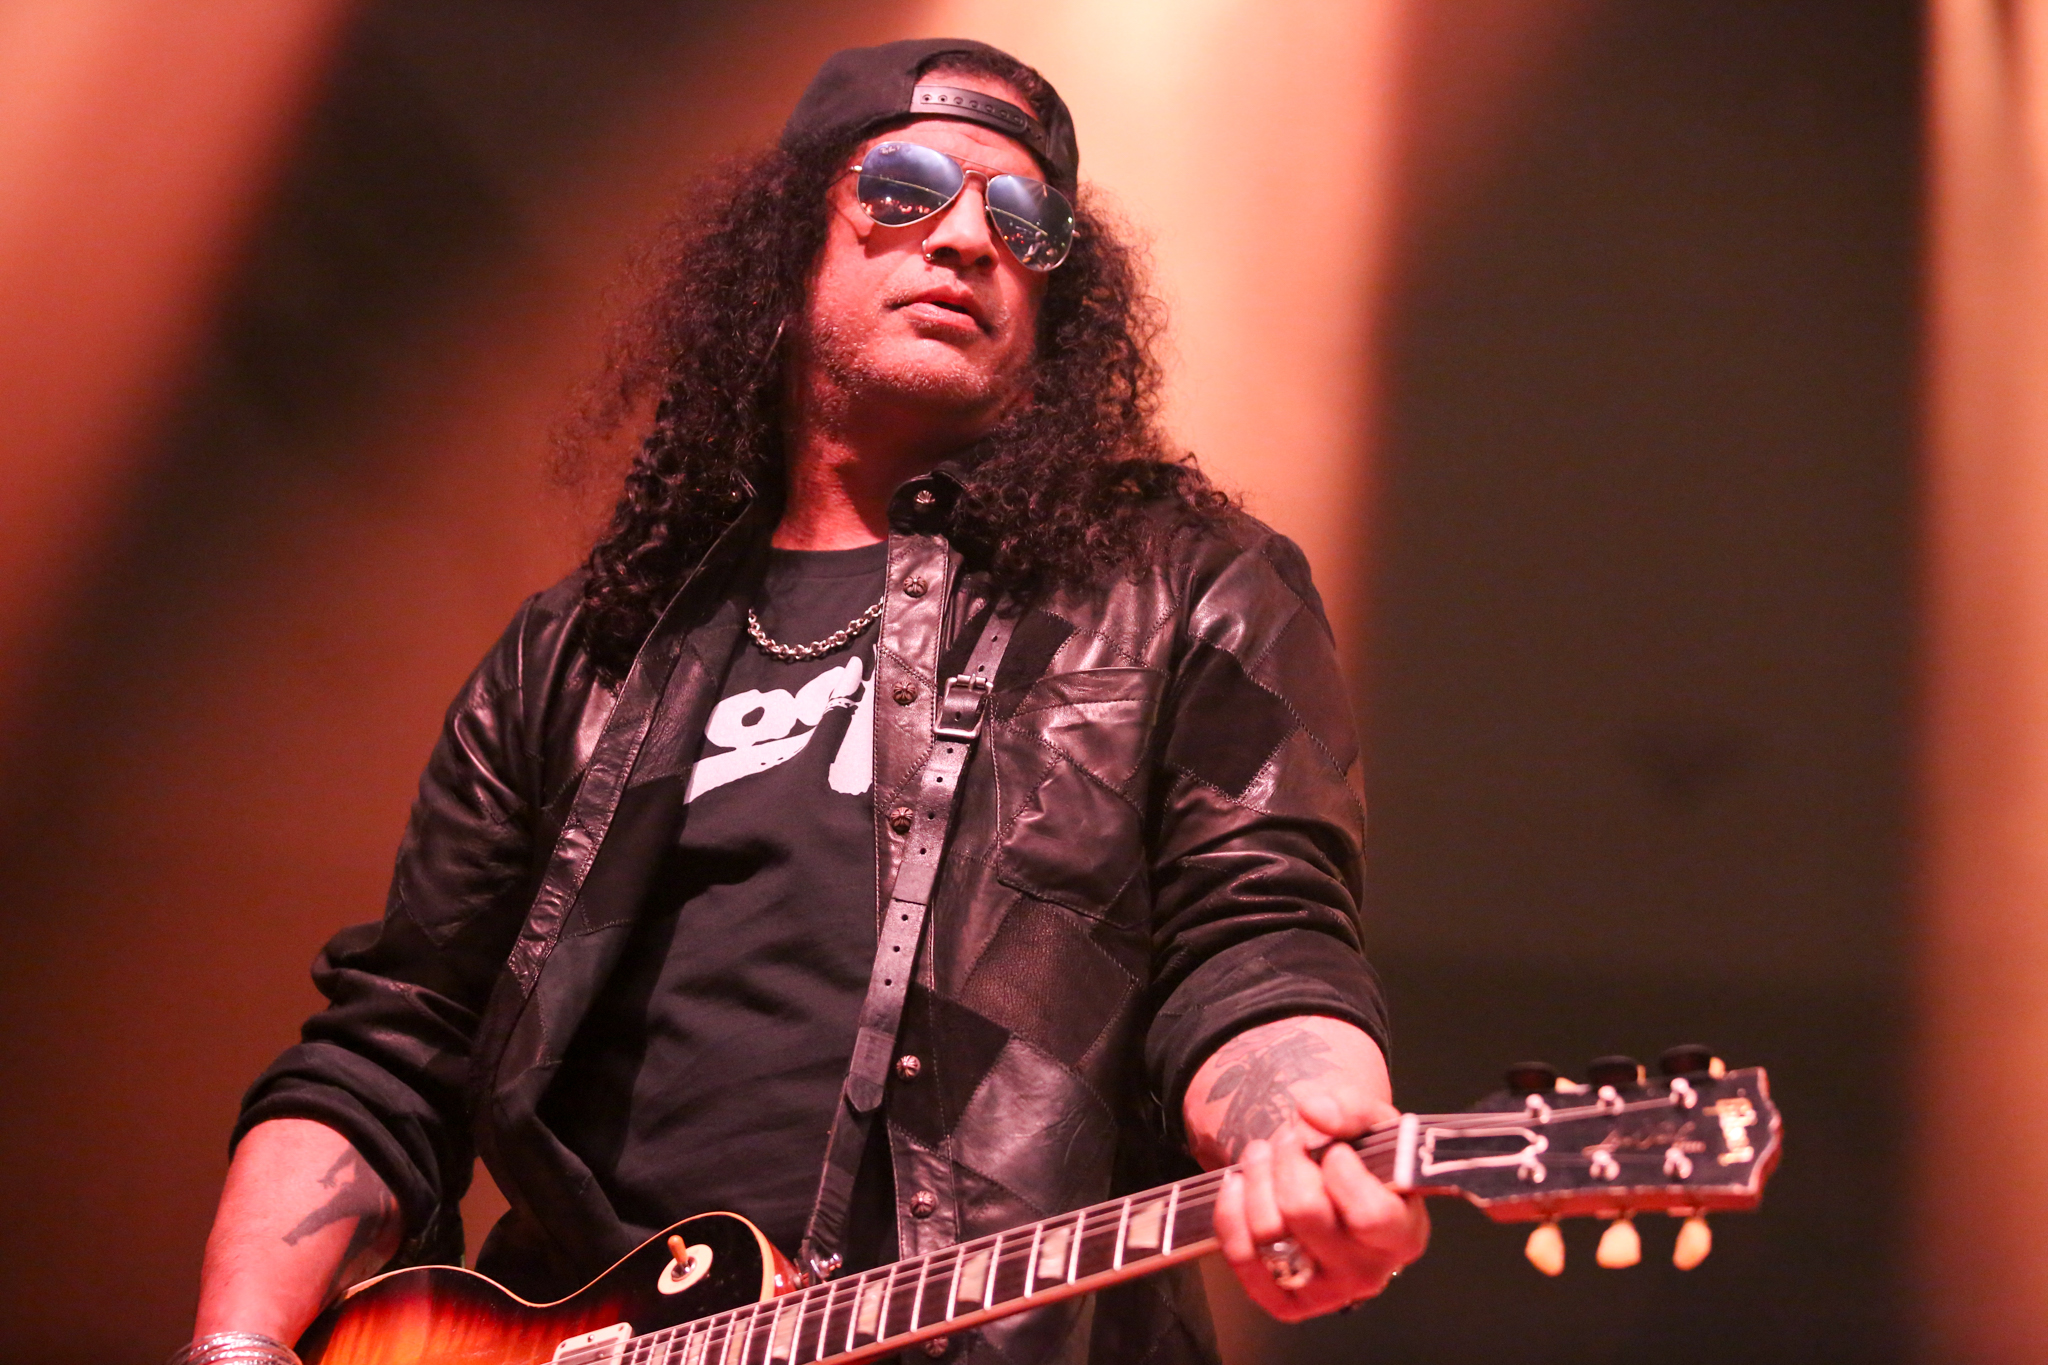 Slash plays a music show in Asheville, NC